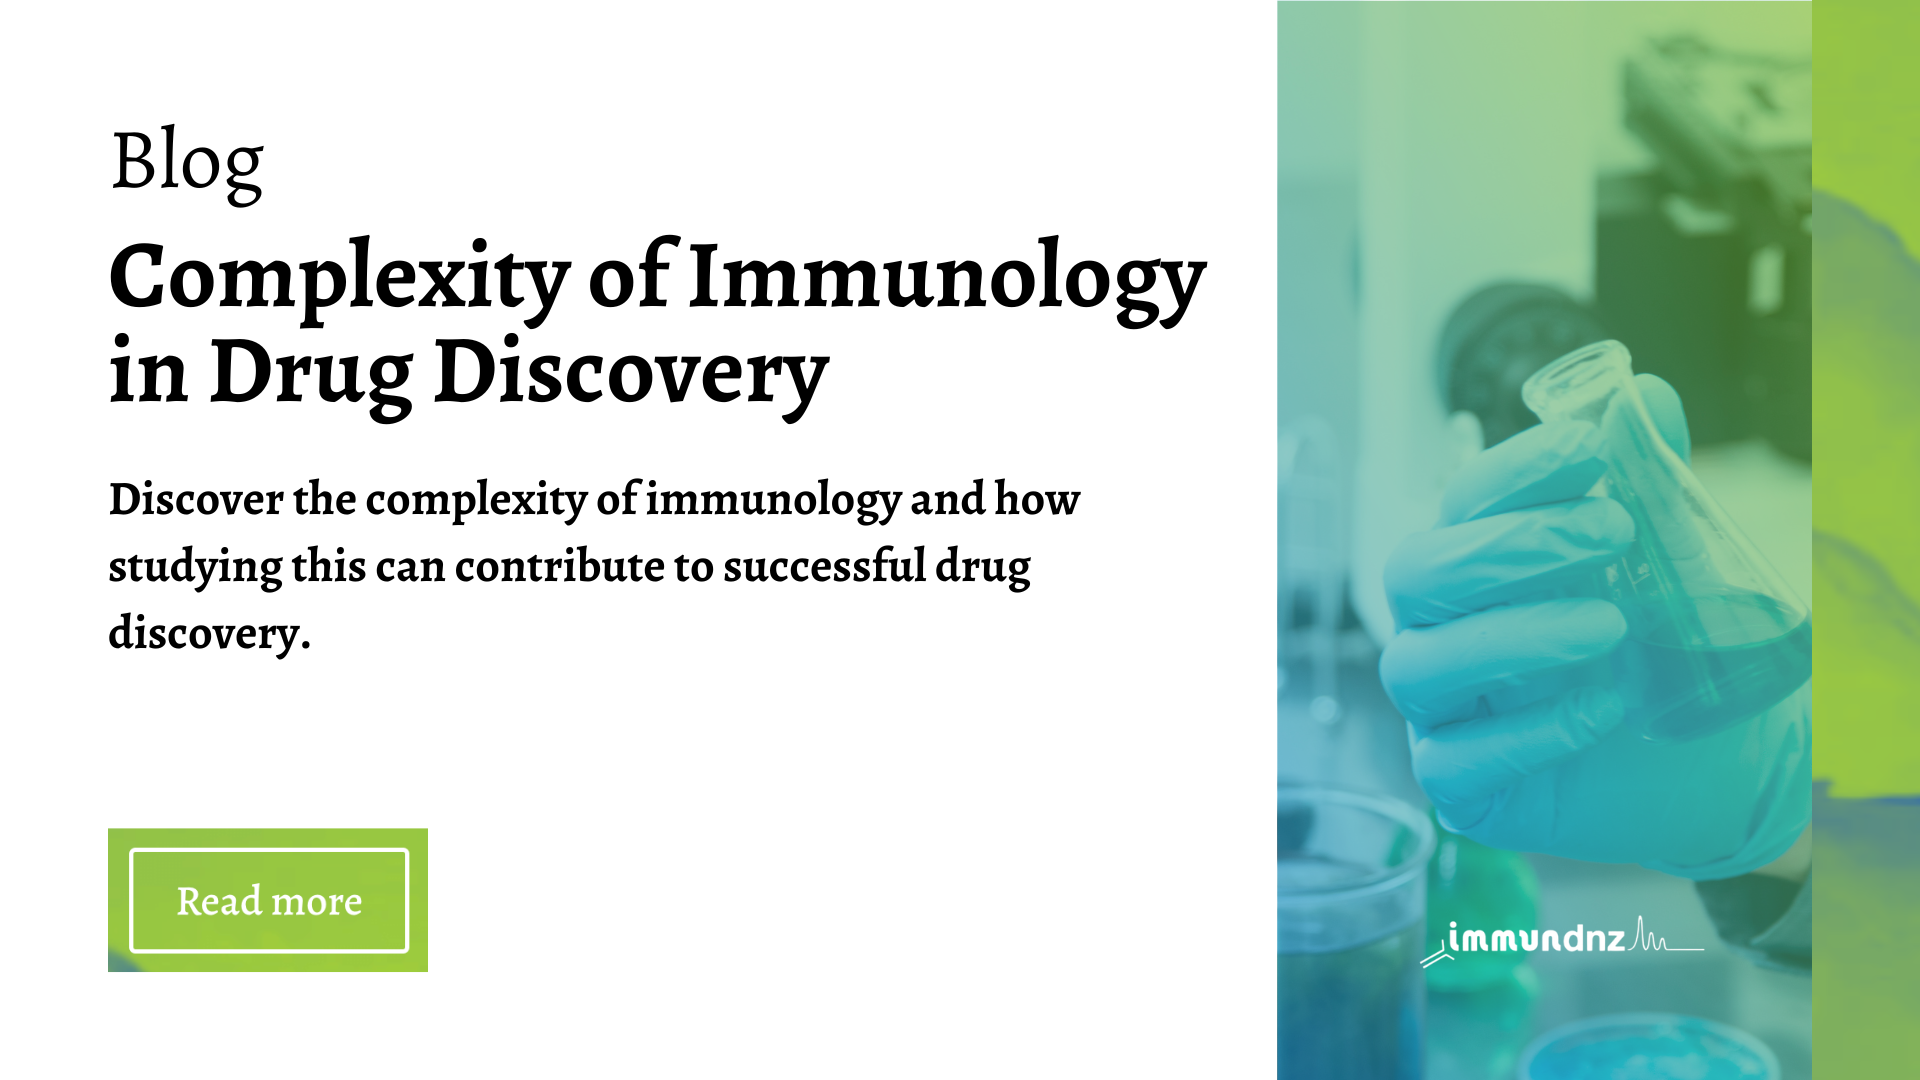 Complexity of immunology in drug discovery